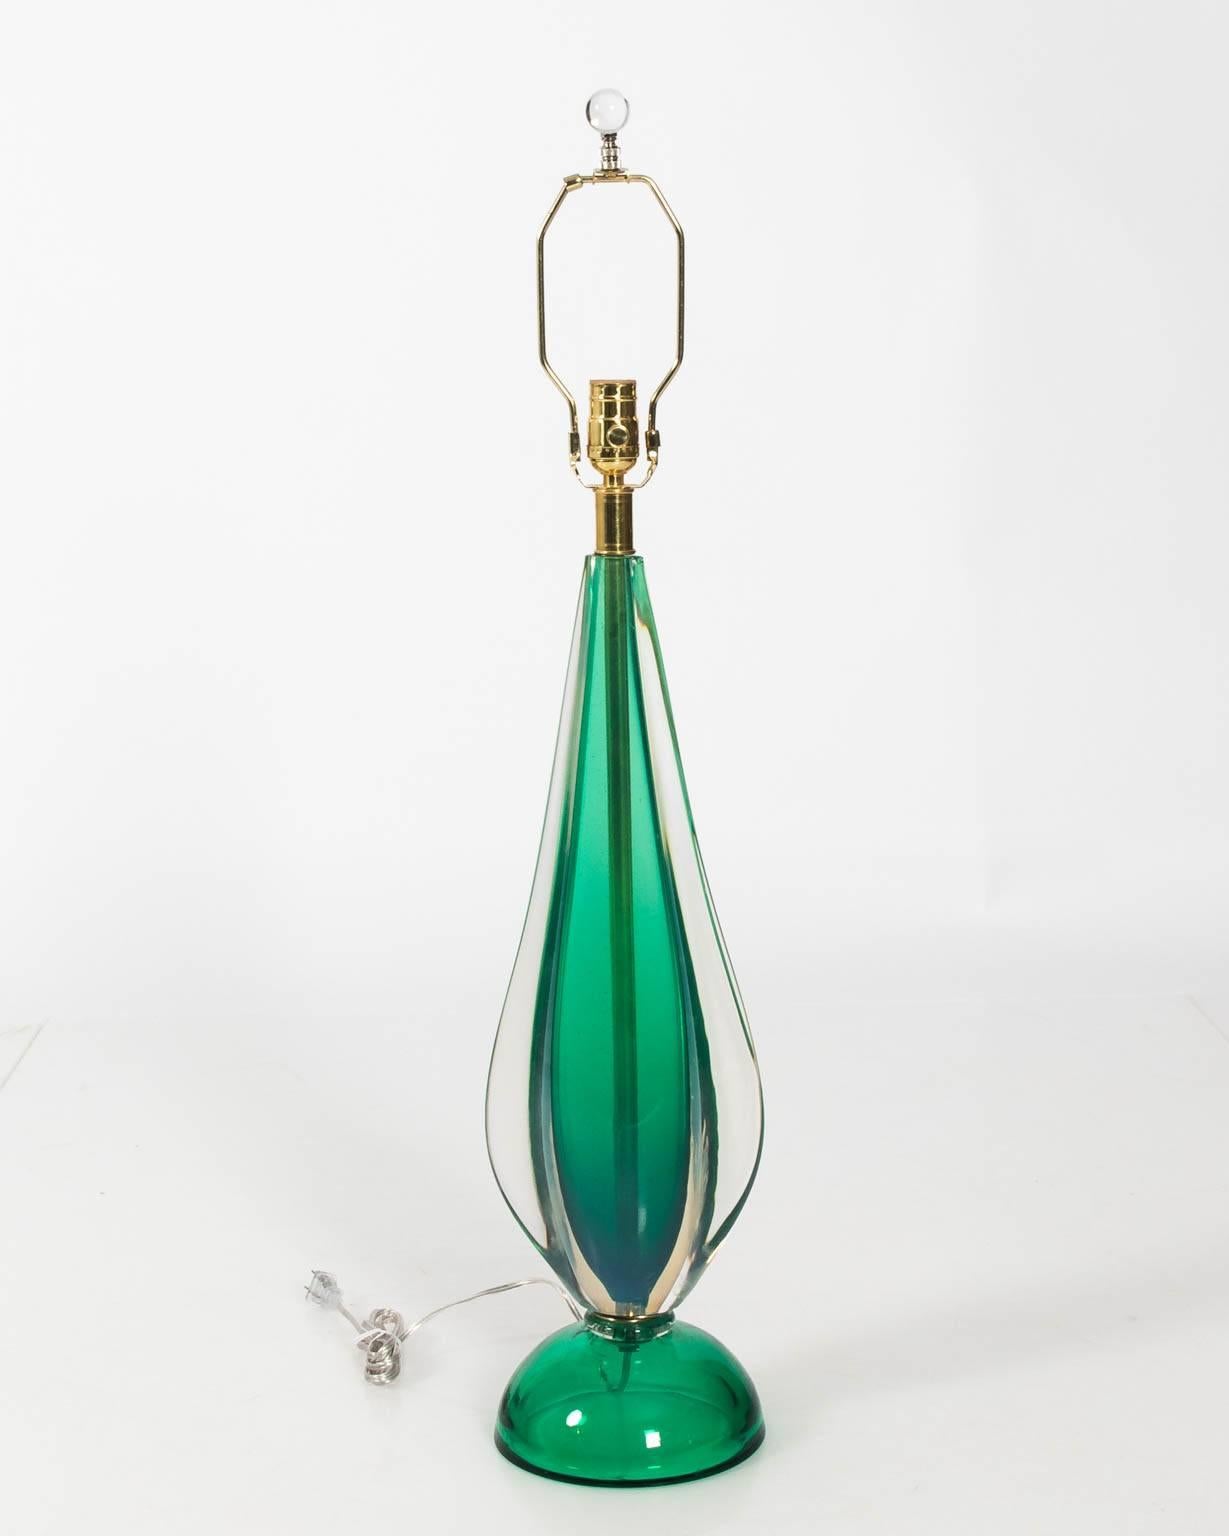 Pair of Mid-Century Modern style heavy green colored Murano glass lamps, with brass fittings, circa 1970s.